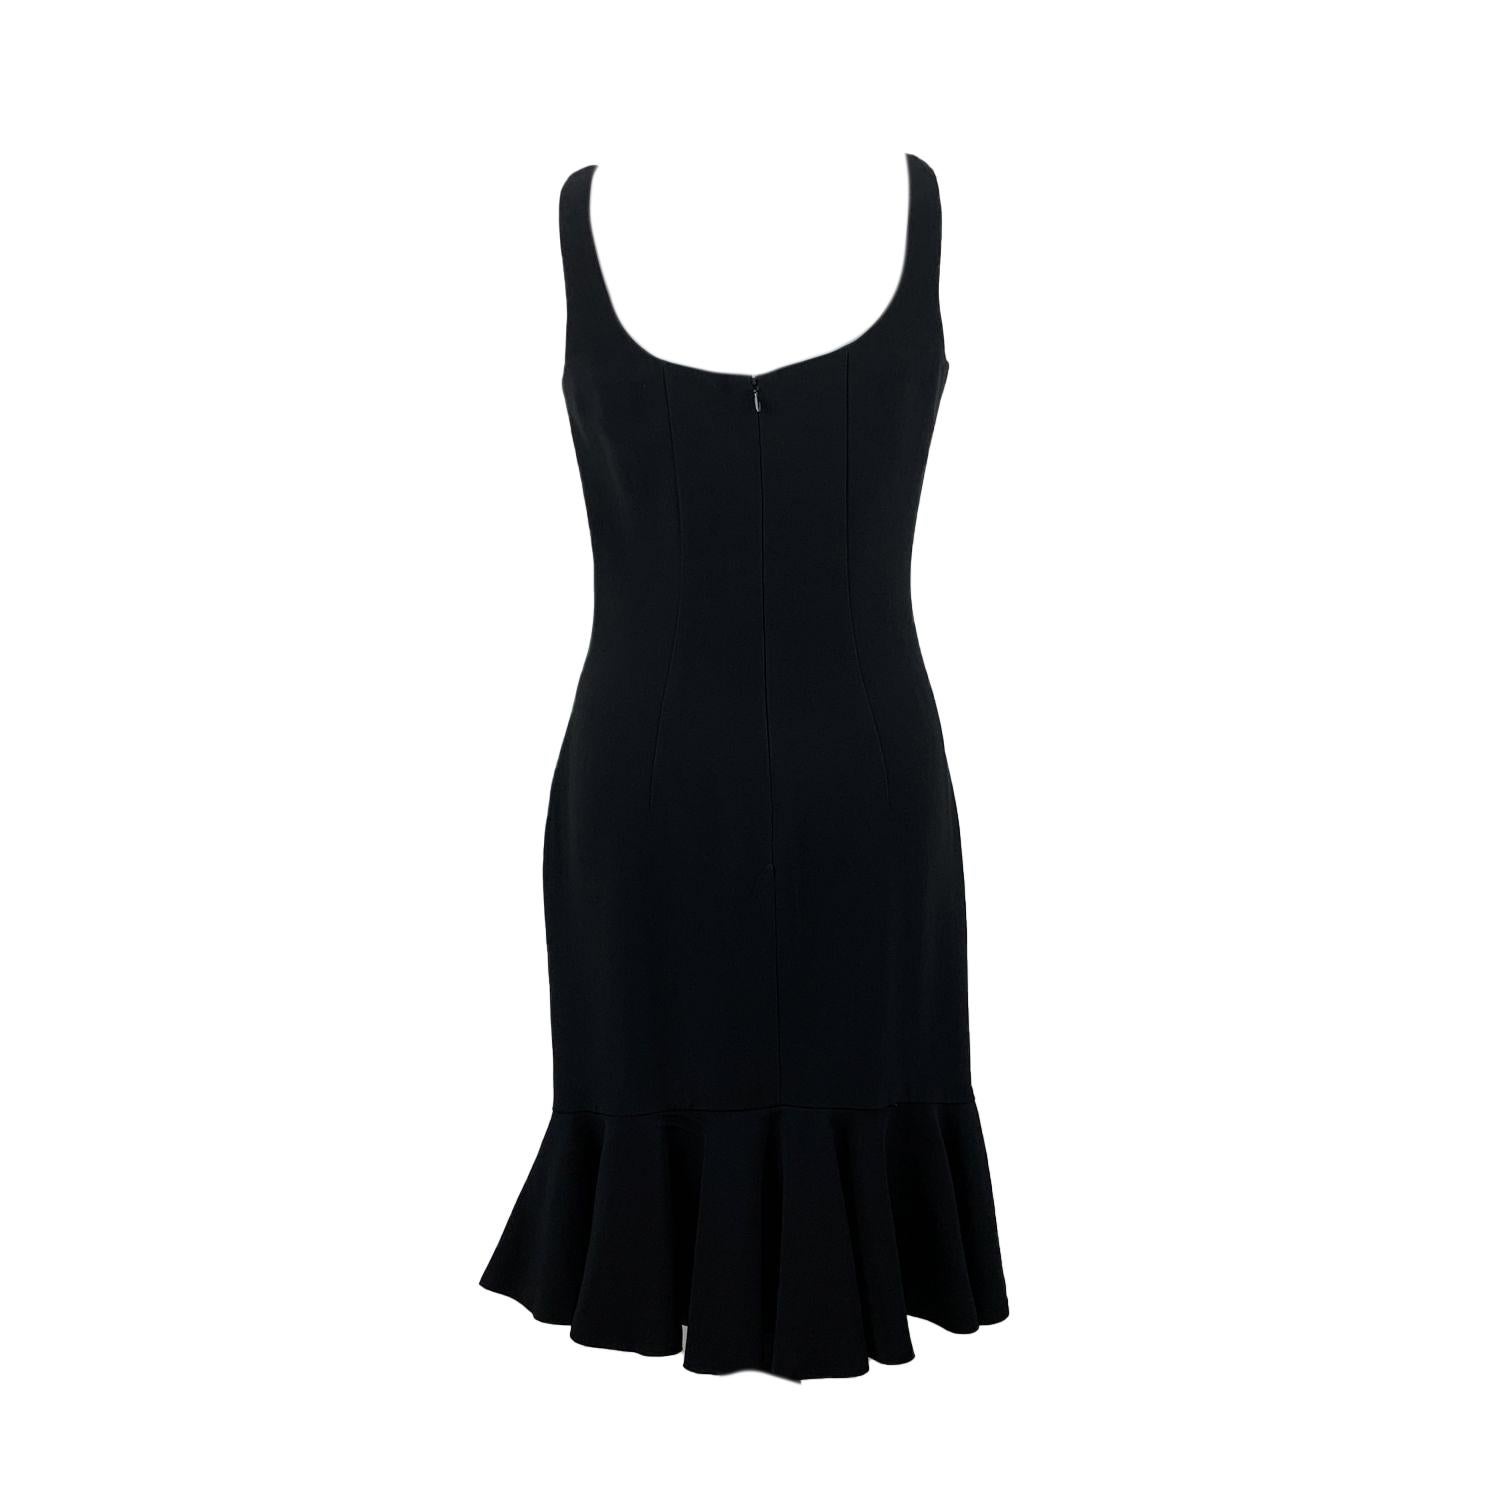 Sleeveless little black dress by Alexander McQueen. Peplum hem. Zip closure on the back. Lined. Composition: 50% acetate, 50% Viscose. Size : 42 IT (The size shown for this item is the size indicated by the designer on the label). It should